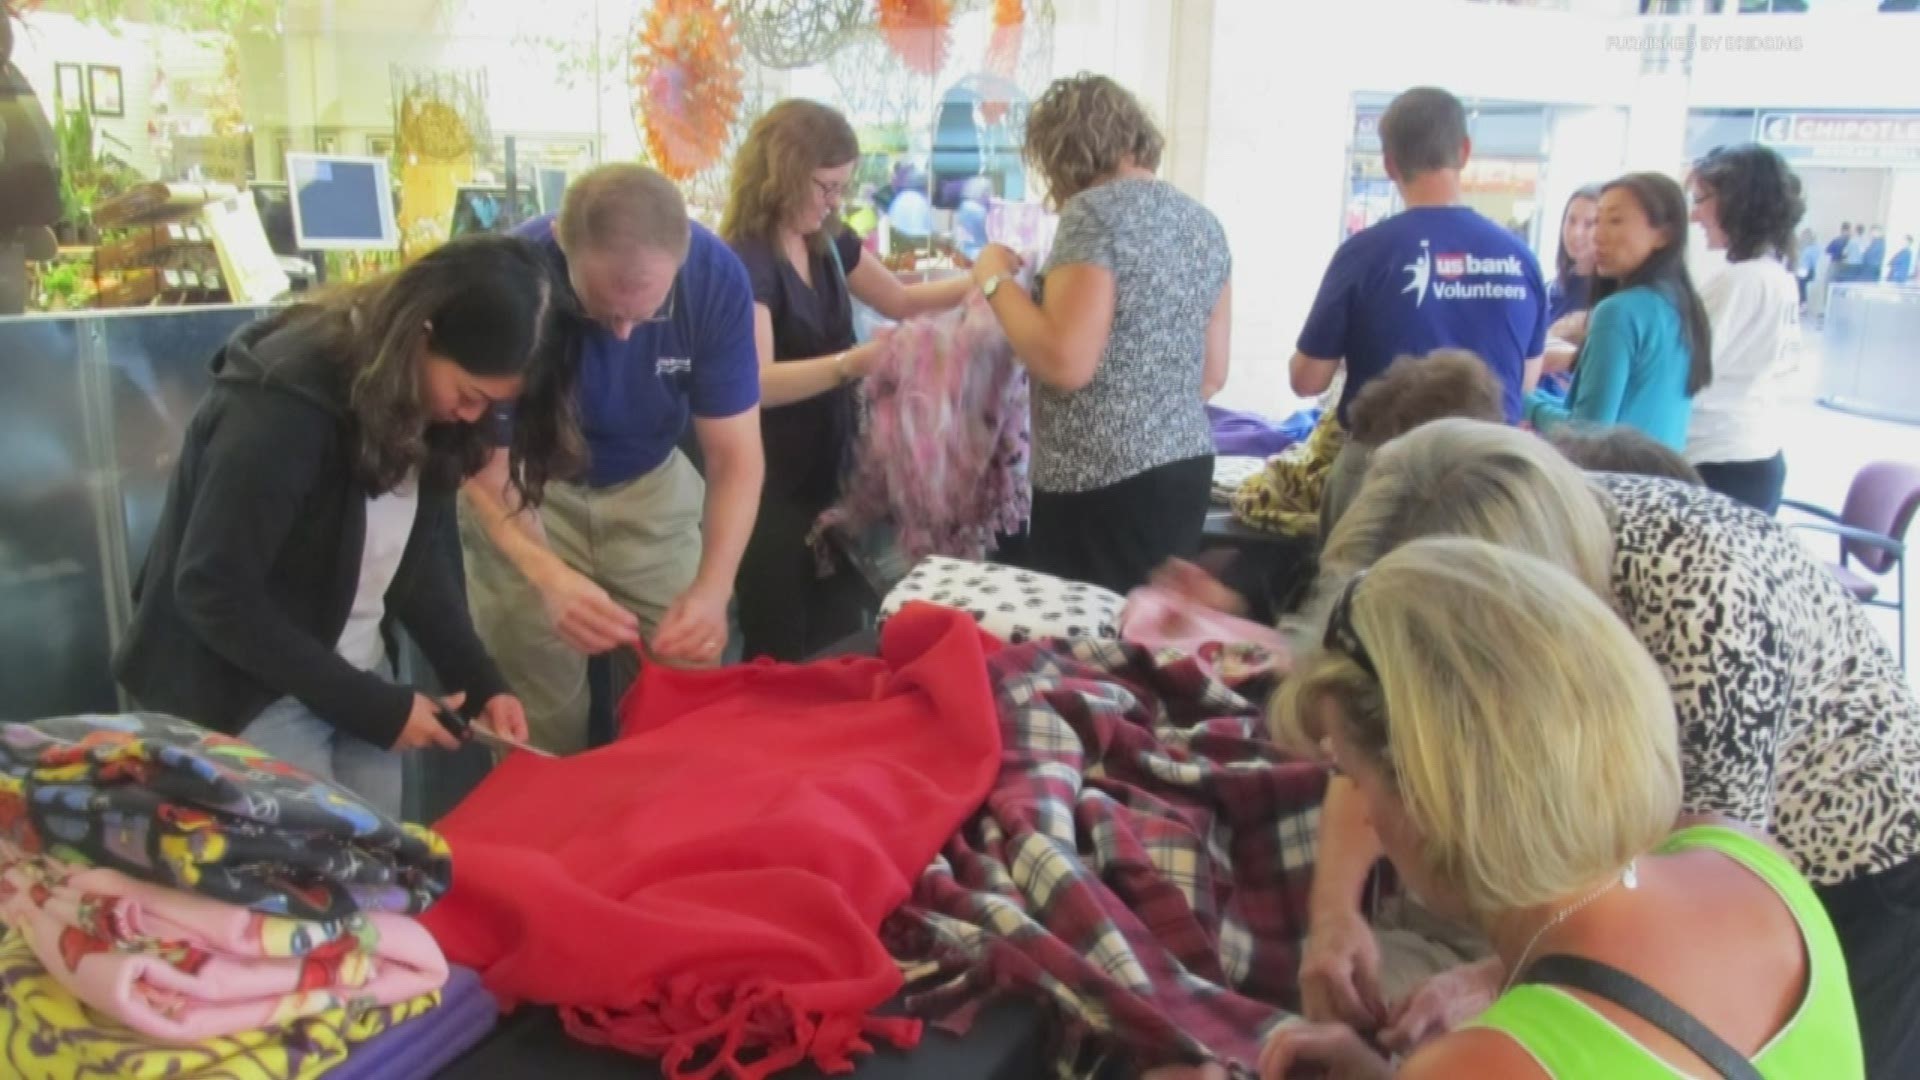 The public is encouraged to donate new or gently used blankets for distribution to local families in need.